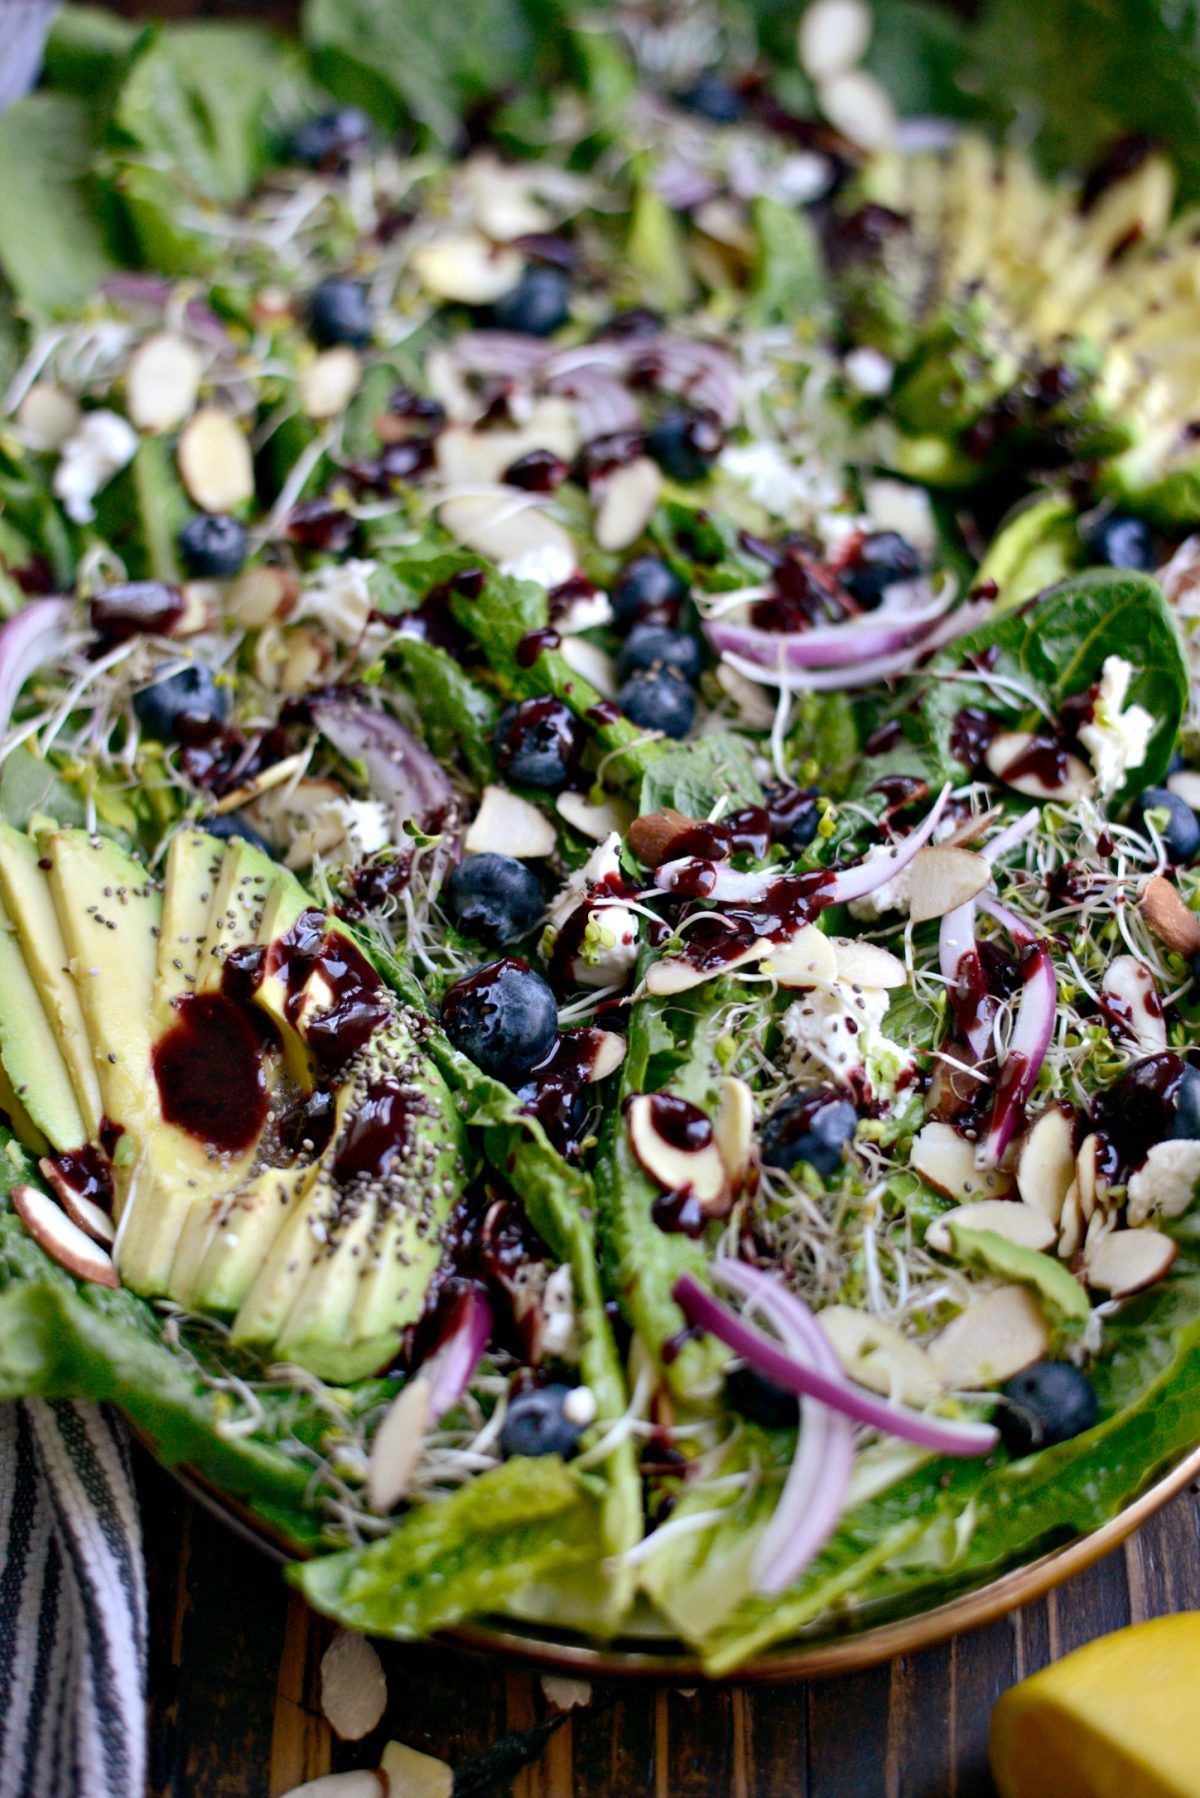 Blueberry Almond Salad with Goat Cheese, Avocado and Blueberry Balsamic Vinaigrette l SimplyScratch.com (7)